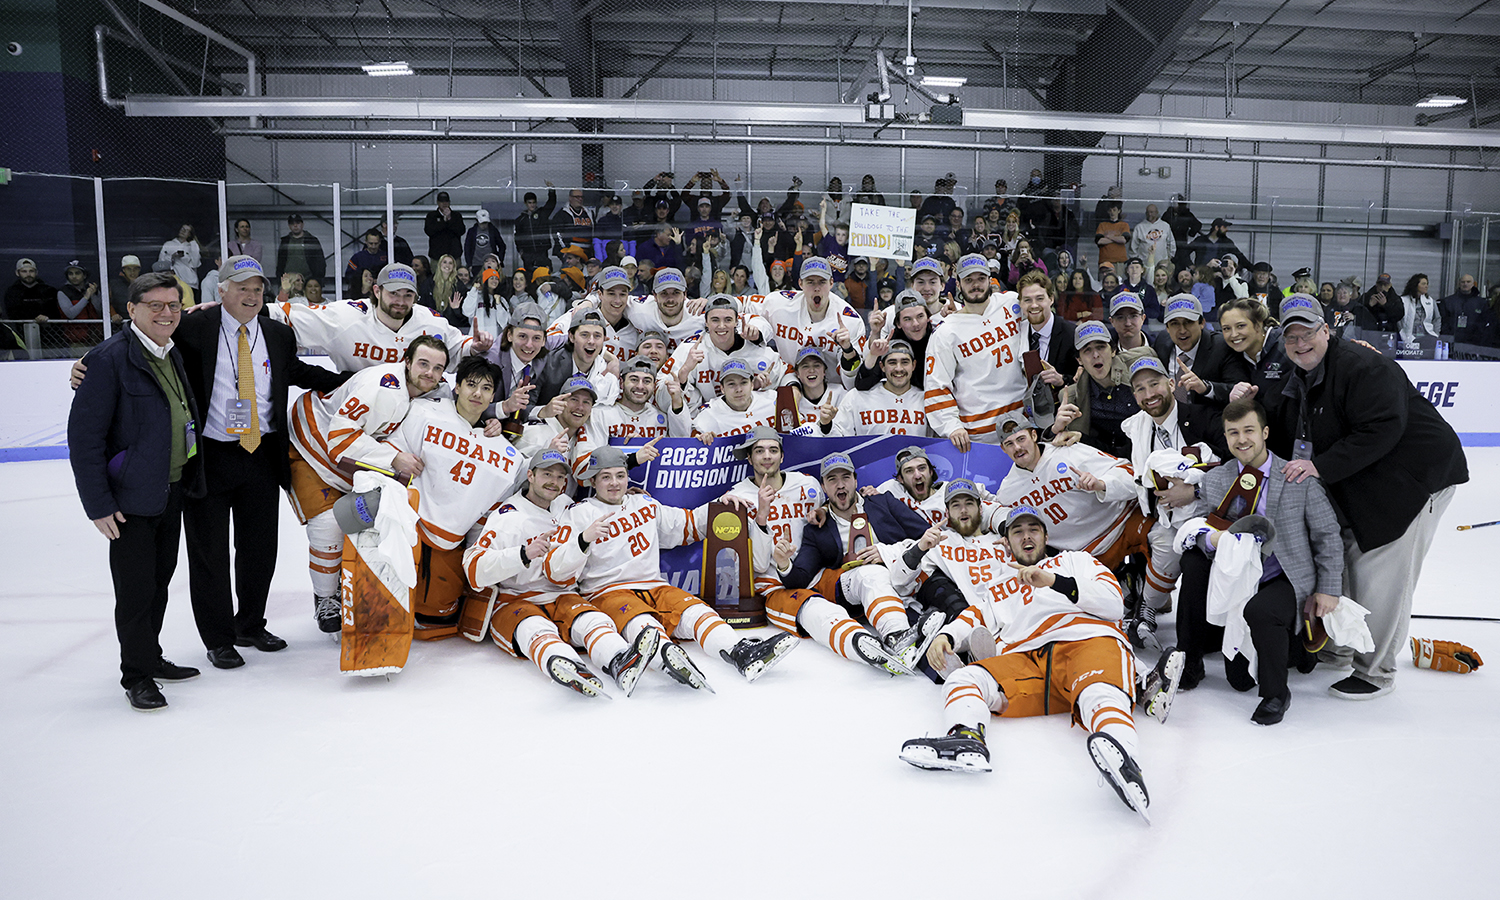 In This Week in Photos, we look back at some of our favorite athletics photos from the semester. Here, Hobart celebrates after winning the 2023 NCAA Division III Men’s Ice Hockey Championship. The Statesmen went 29-2-0 on their way to winning their first national championship in program history.